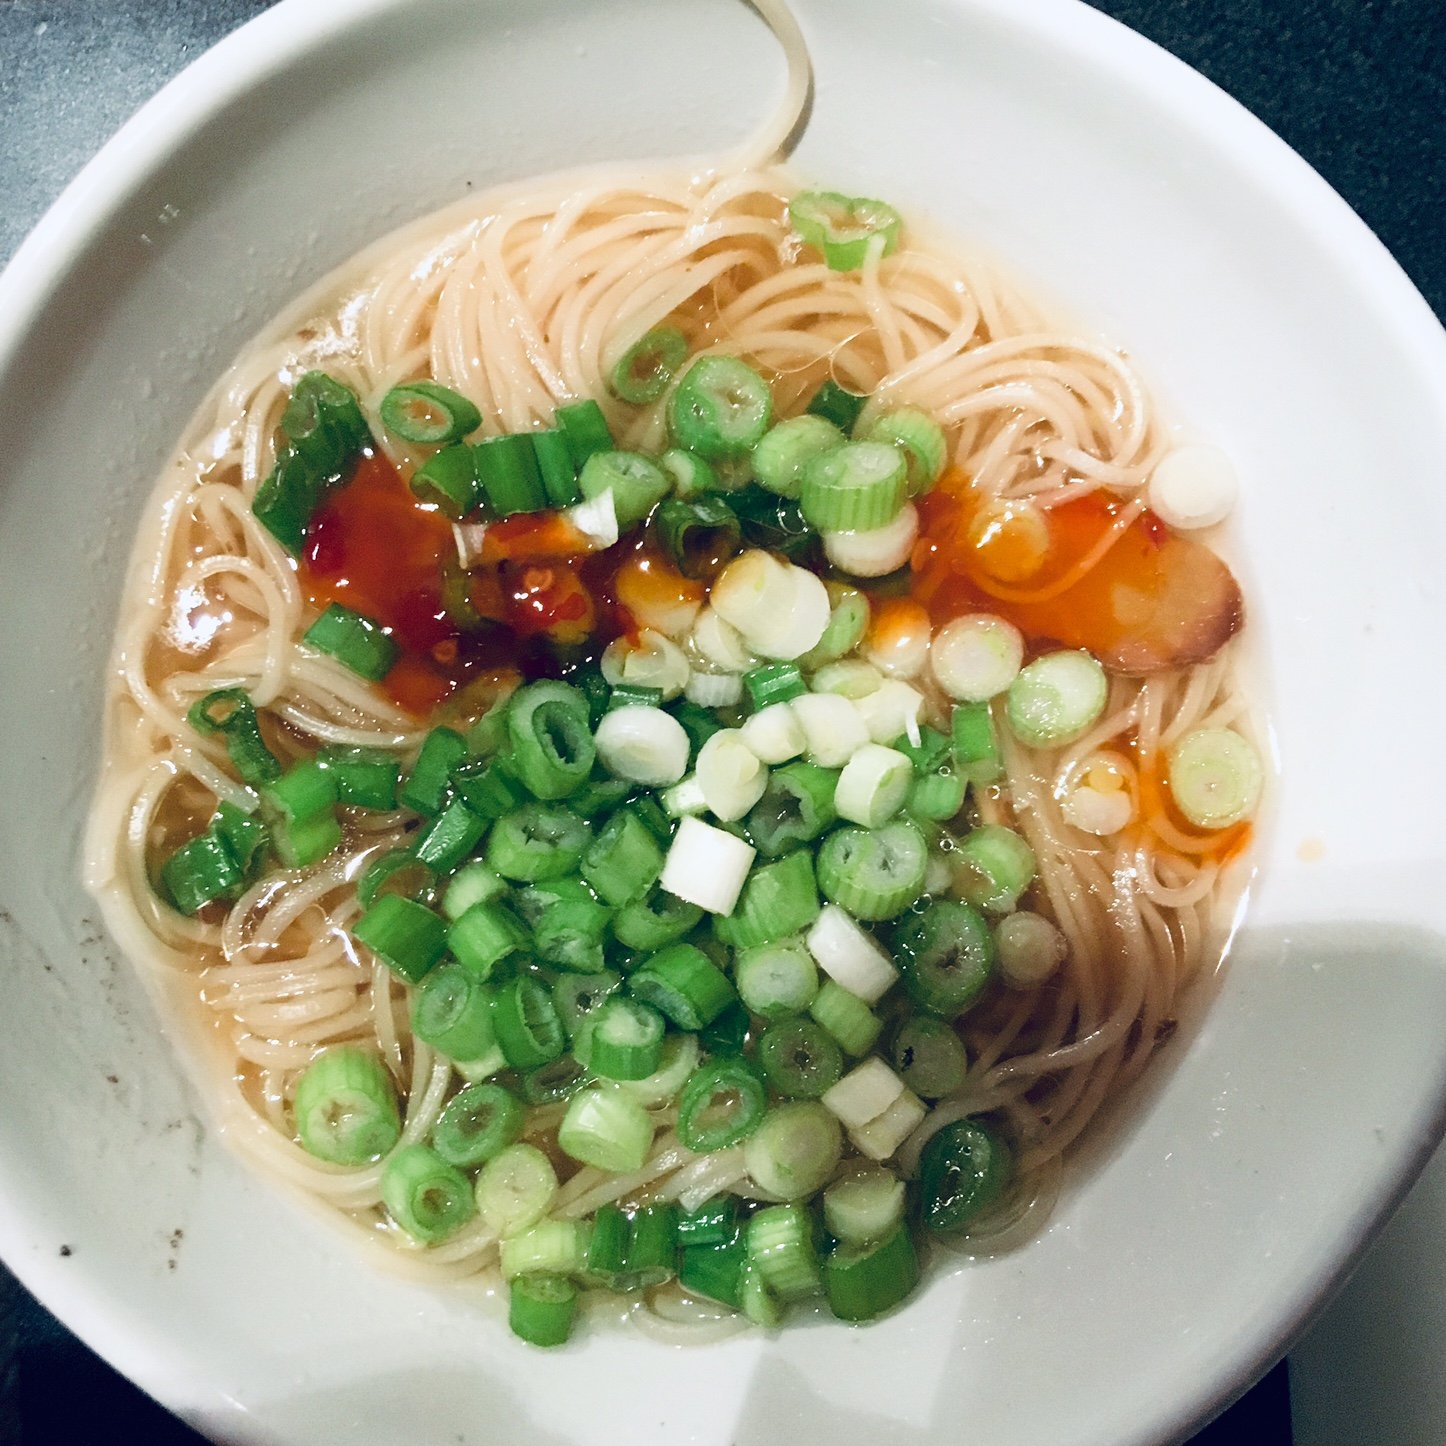 Homemade Noodles in Chicken Broth